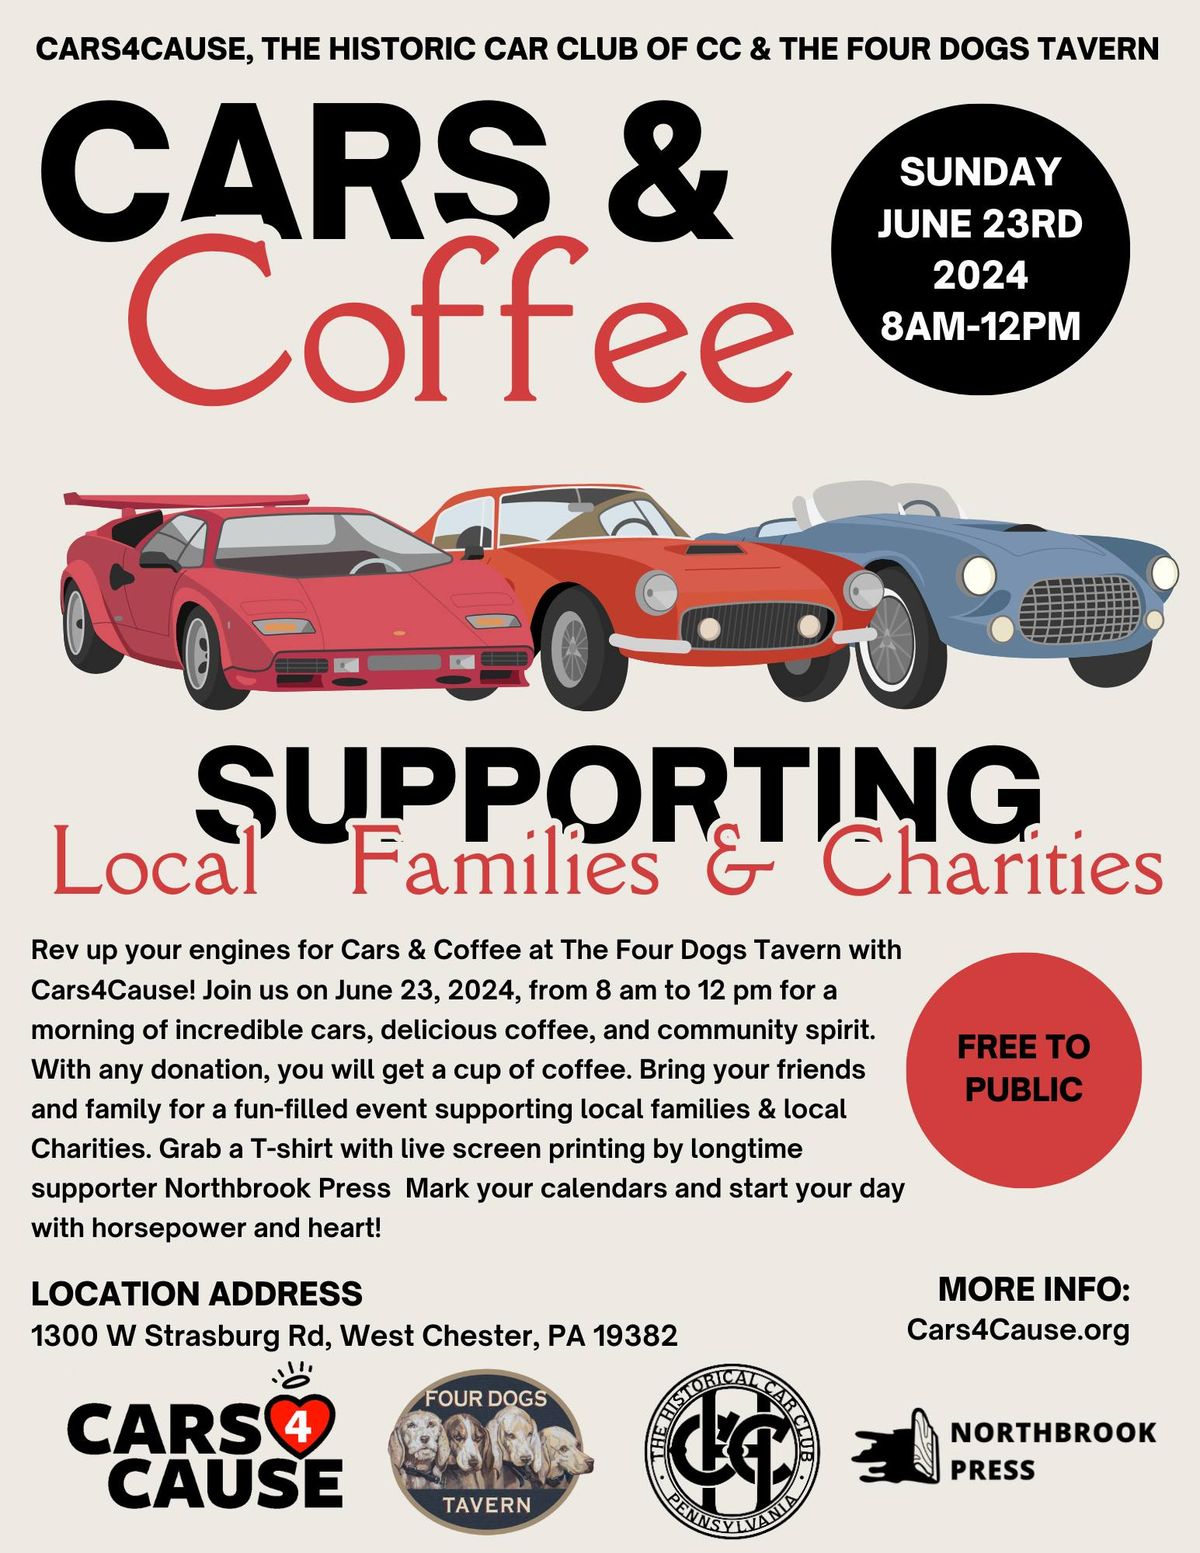 Cars & Coffee at The Four Dogs Tavern with Cars4Cause